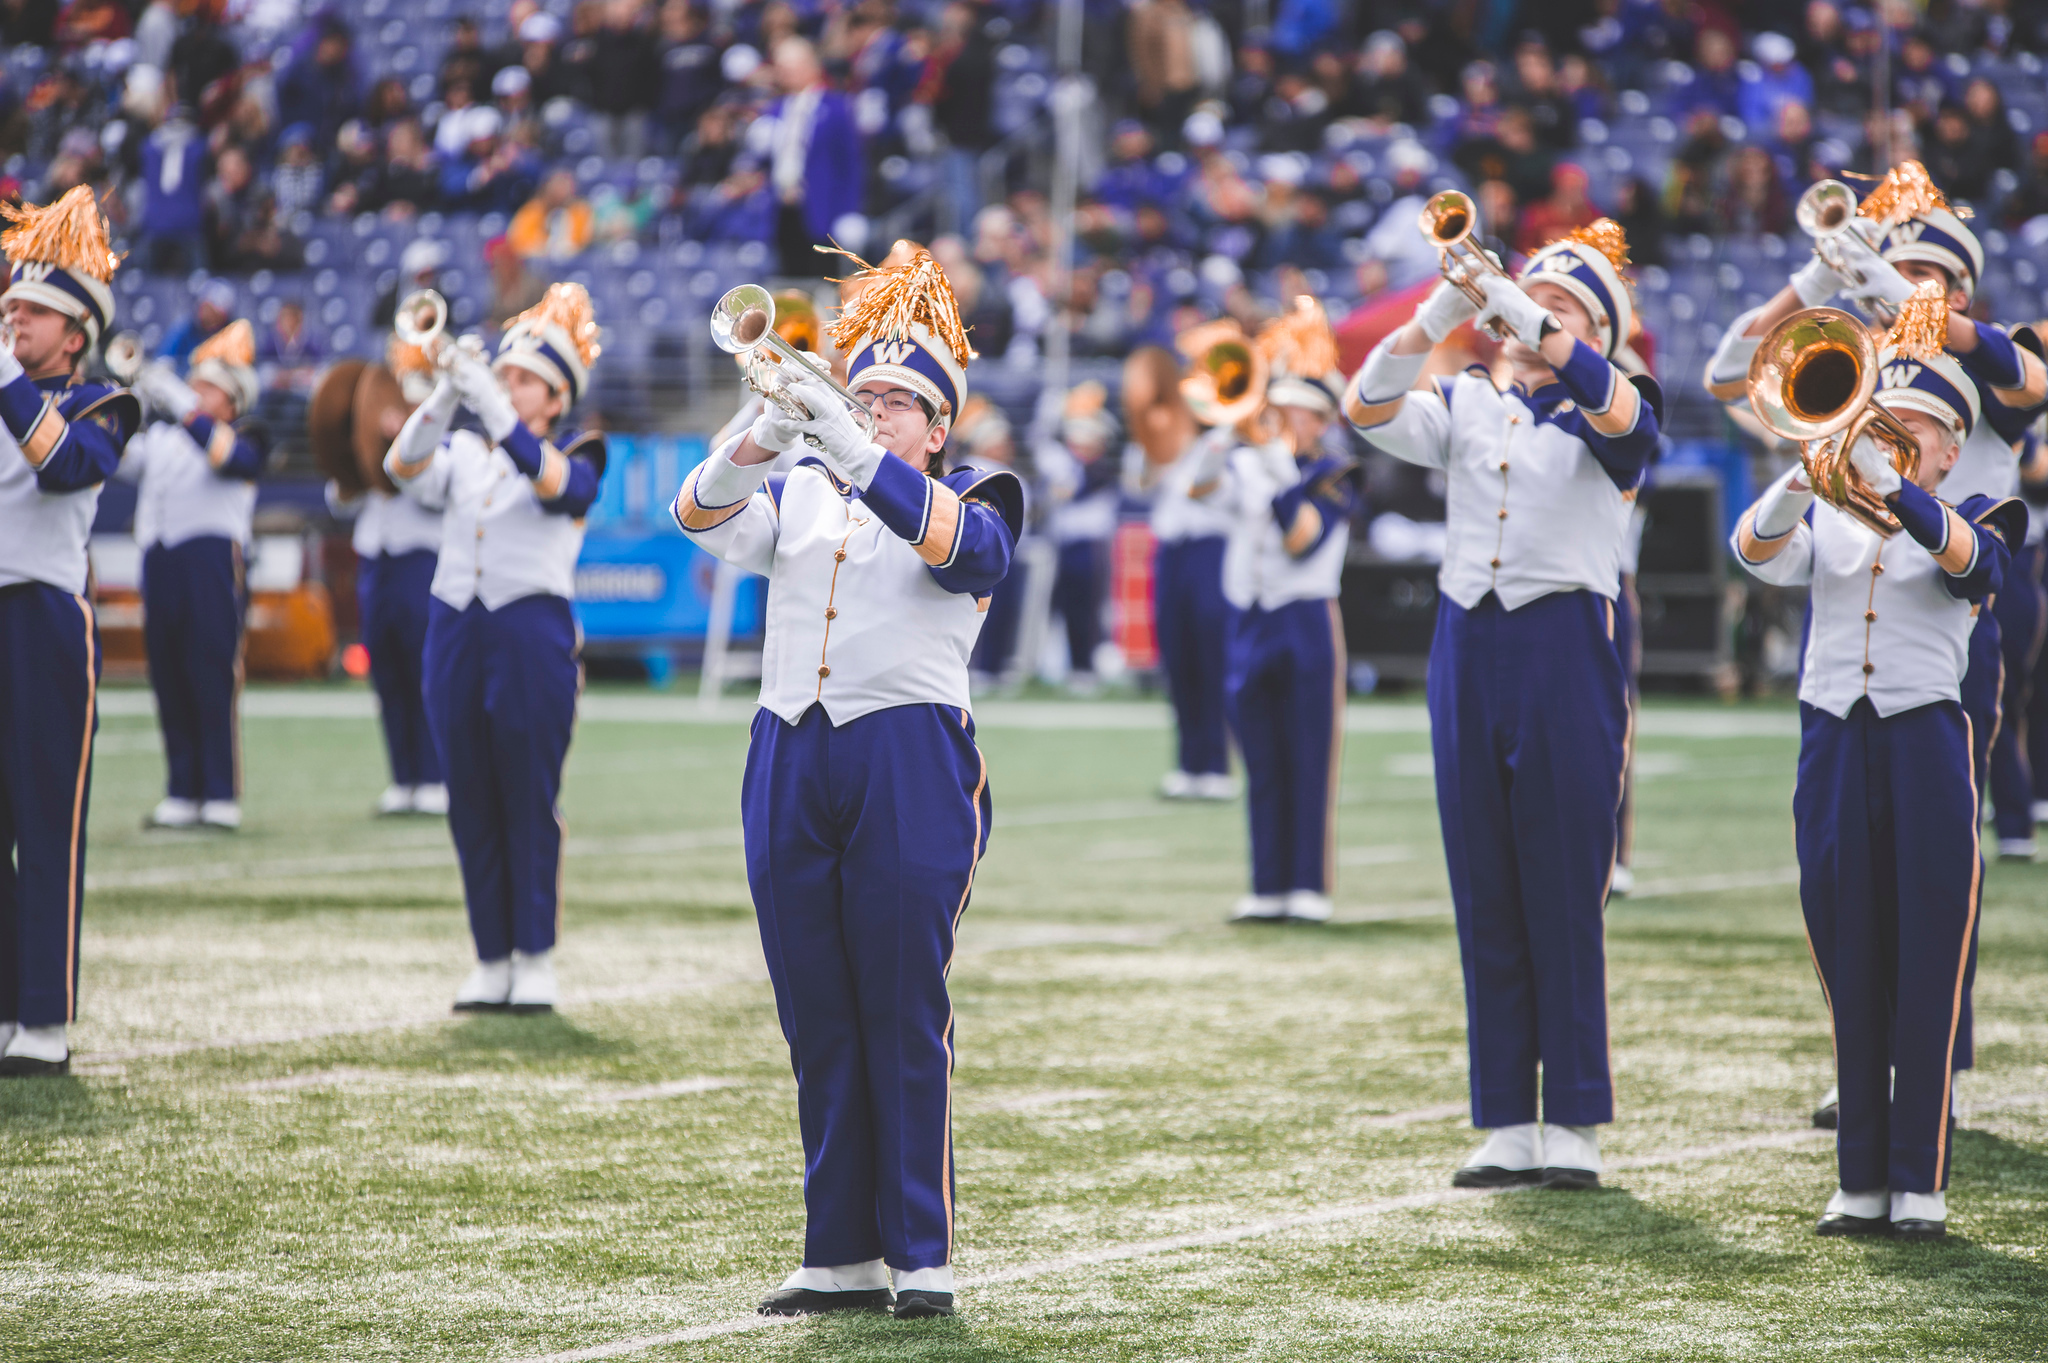 The Husky Marching Band announces an arrival